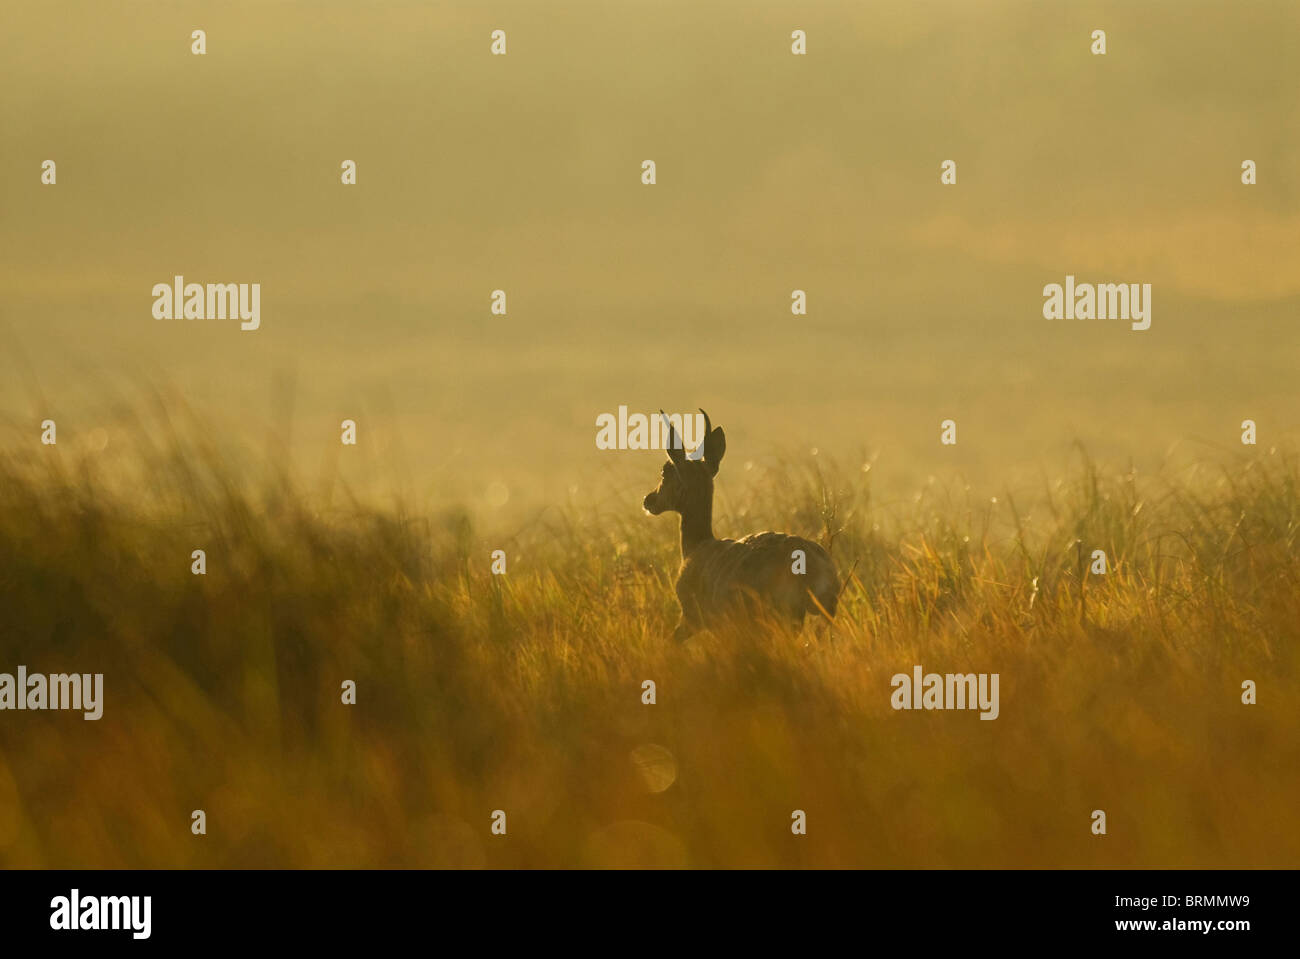 Common Reed buck silhouetted in long grass at sunset Stock Photo